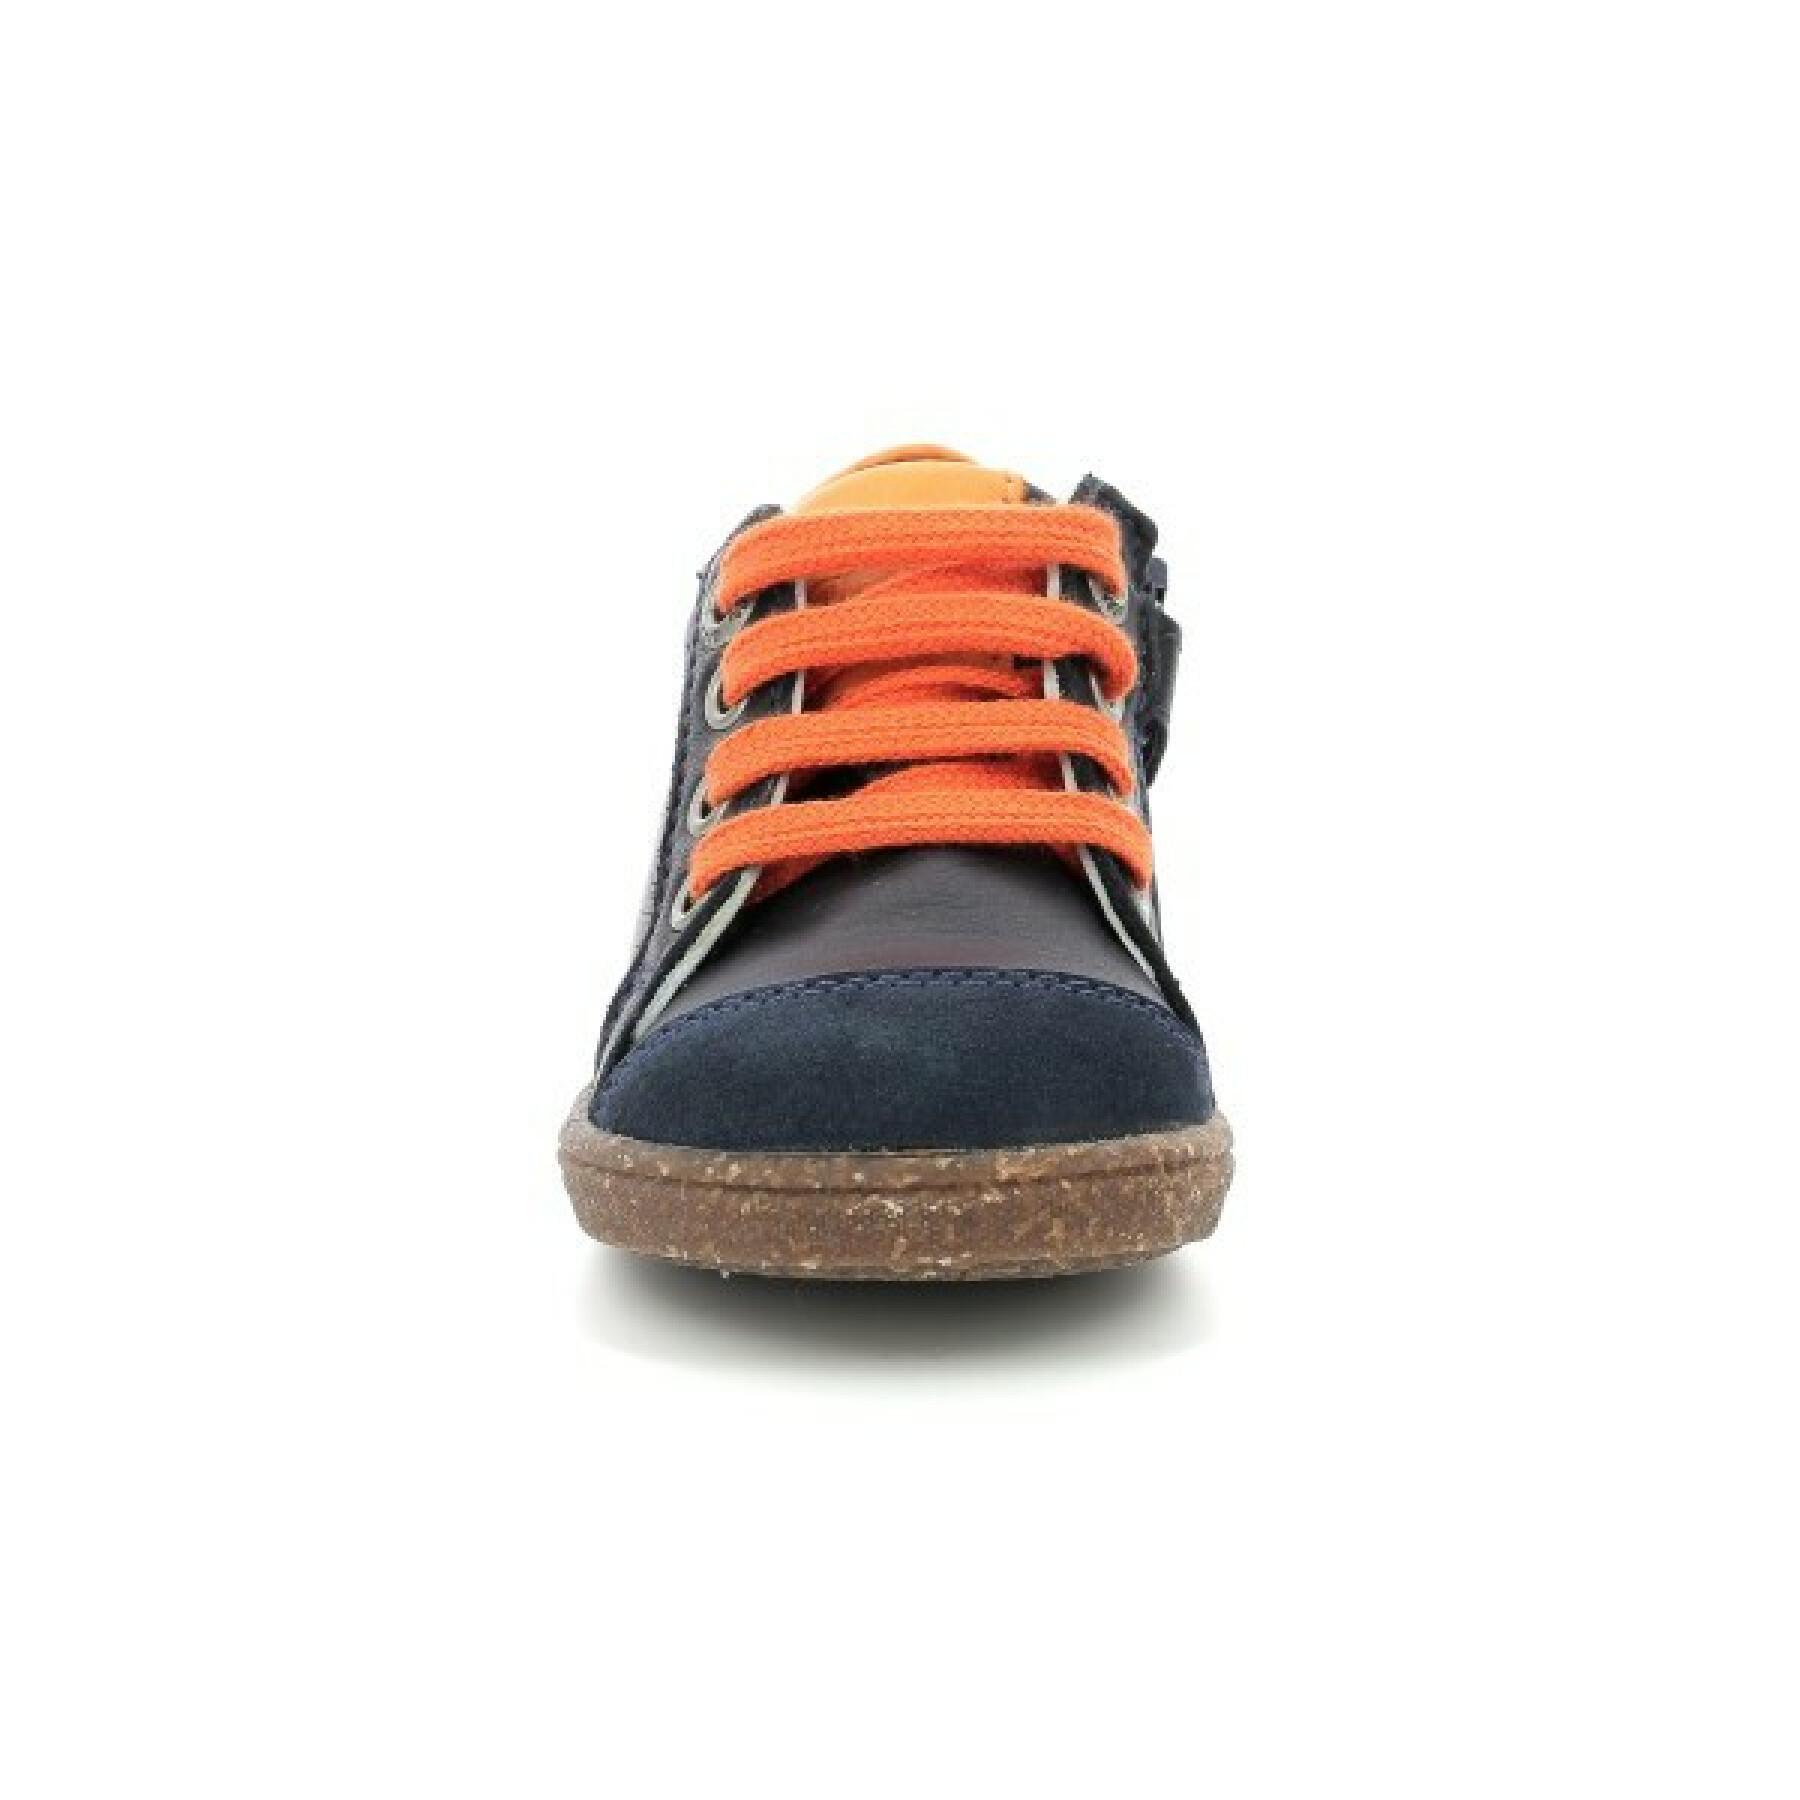 Baby sneakers Aster wanice fantaisie